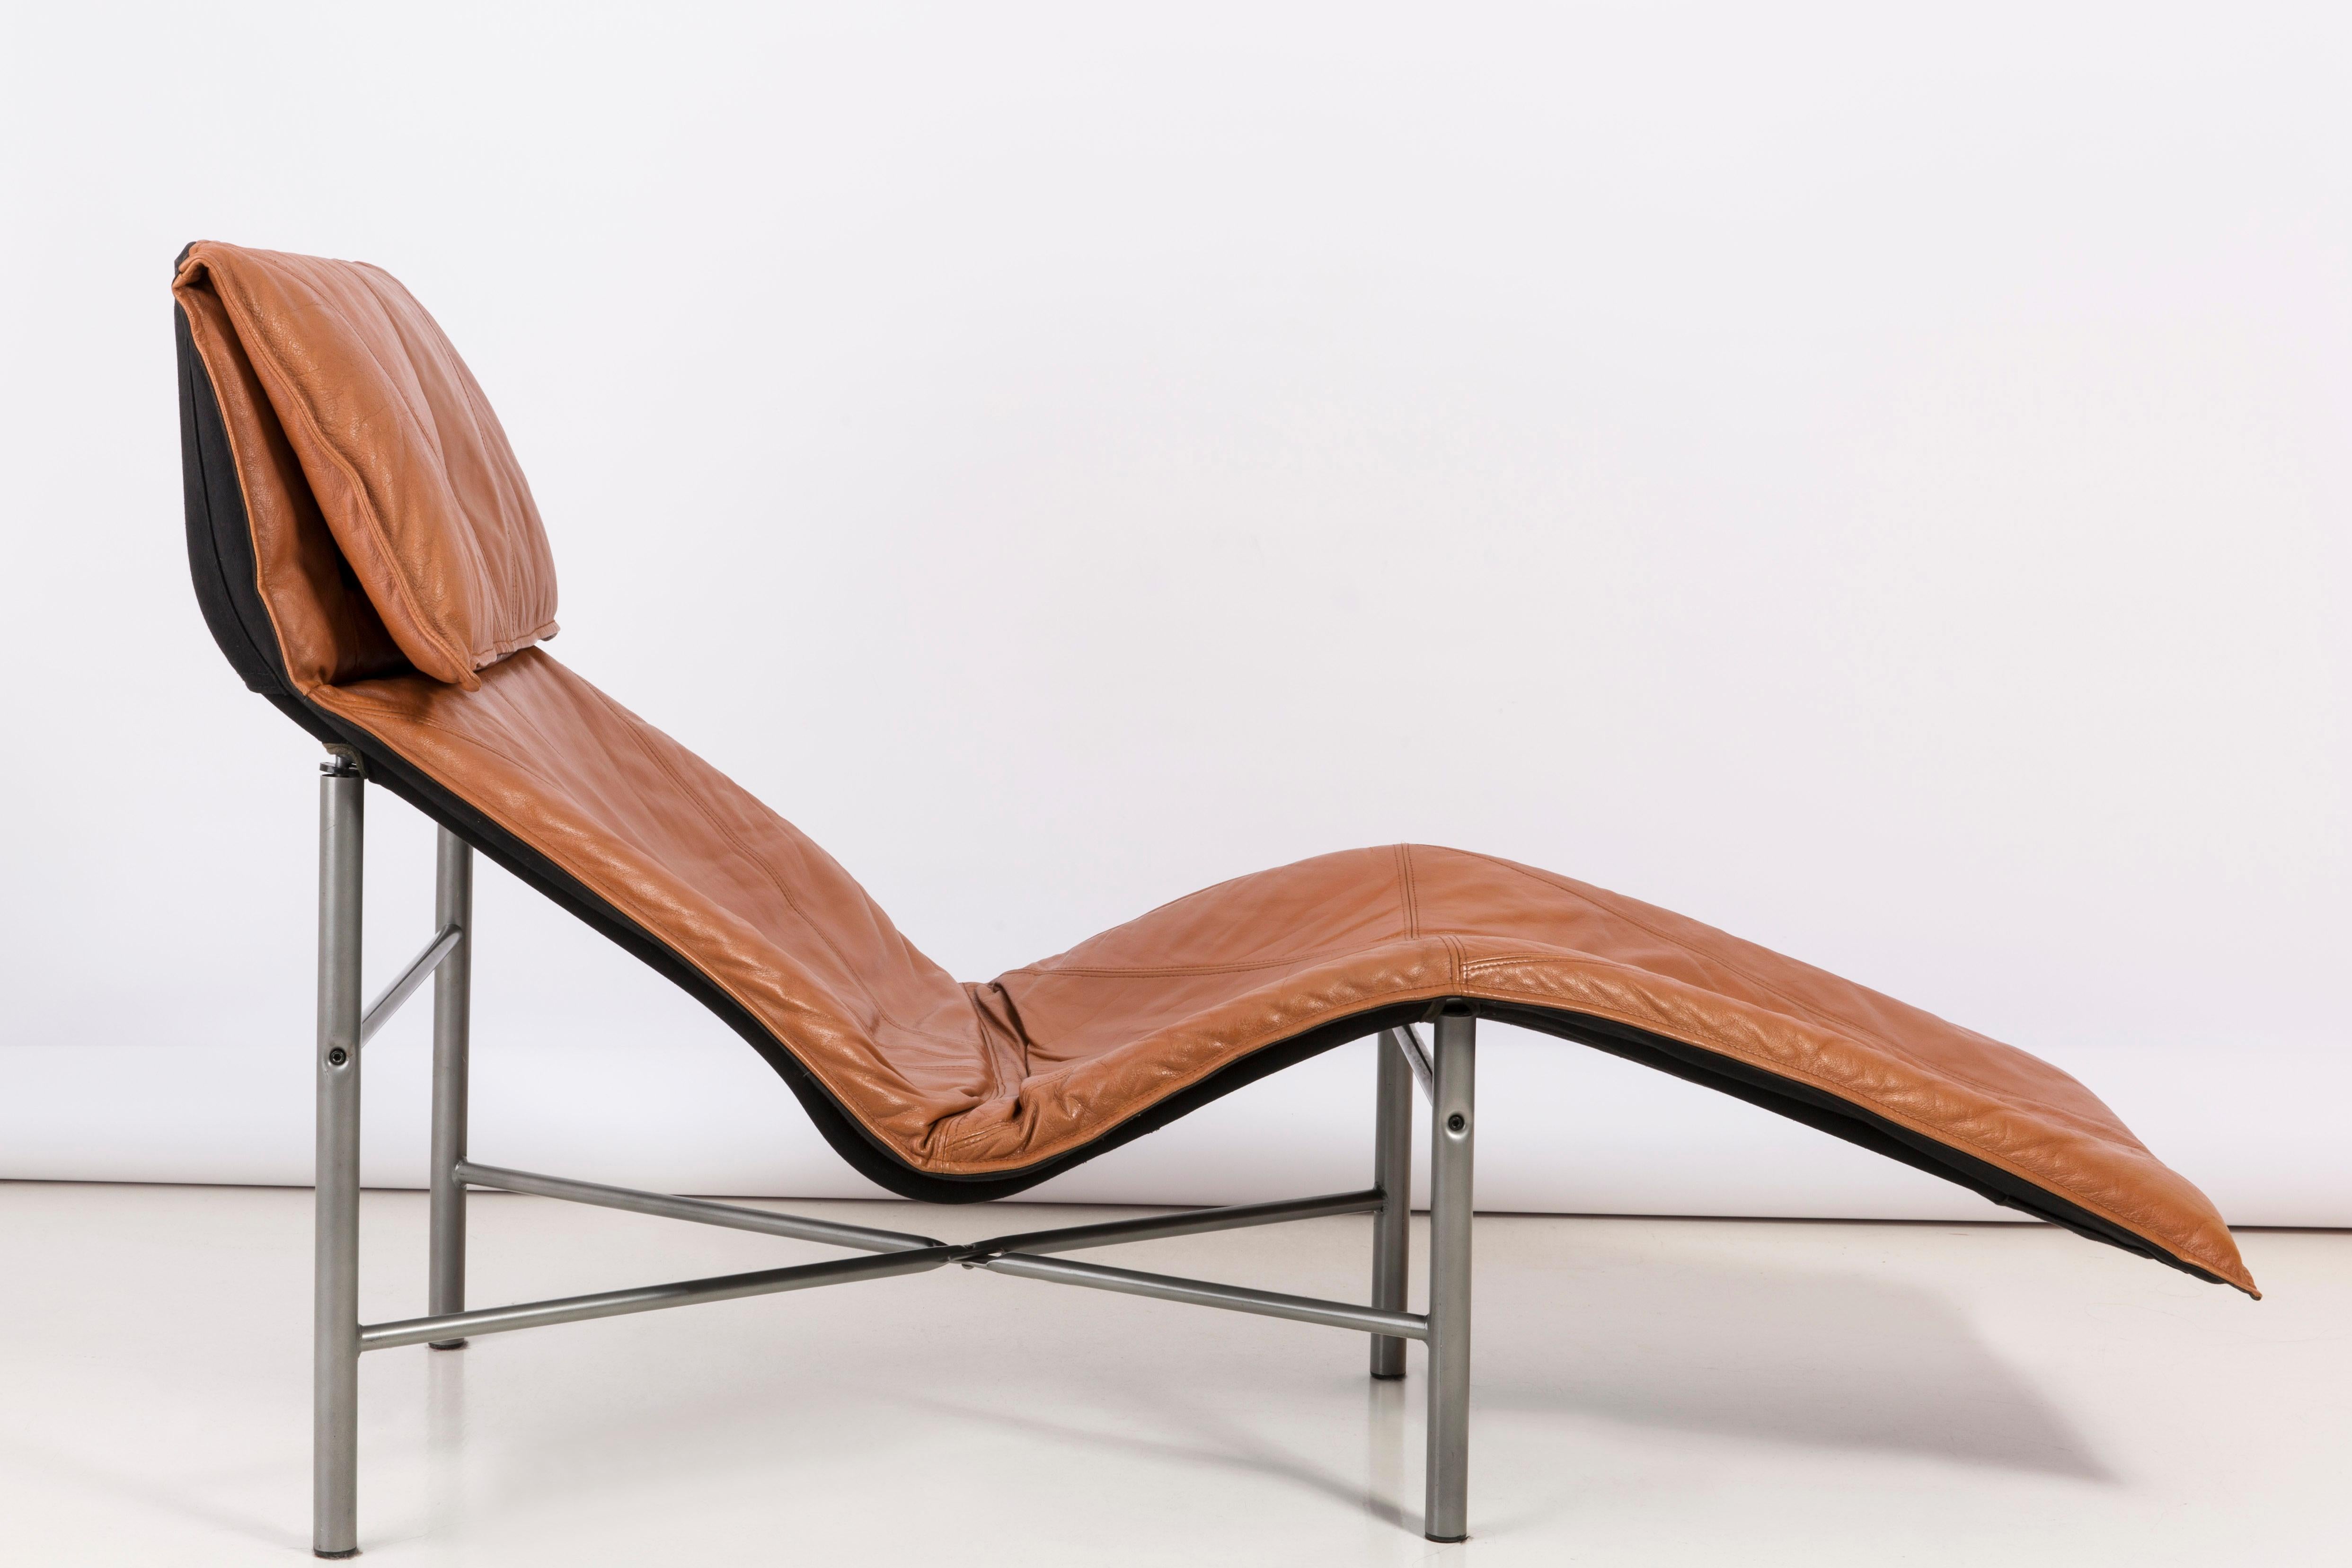 Steel Two Midcentury Danish Modern Leather Chaise Lounge Chairs, Tord Björklund, 1980 For Sale